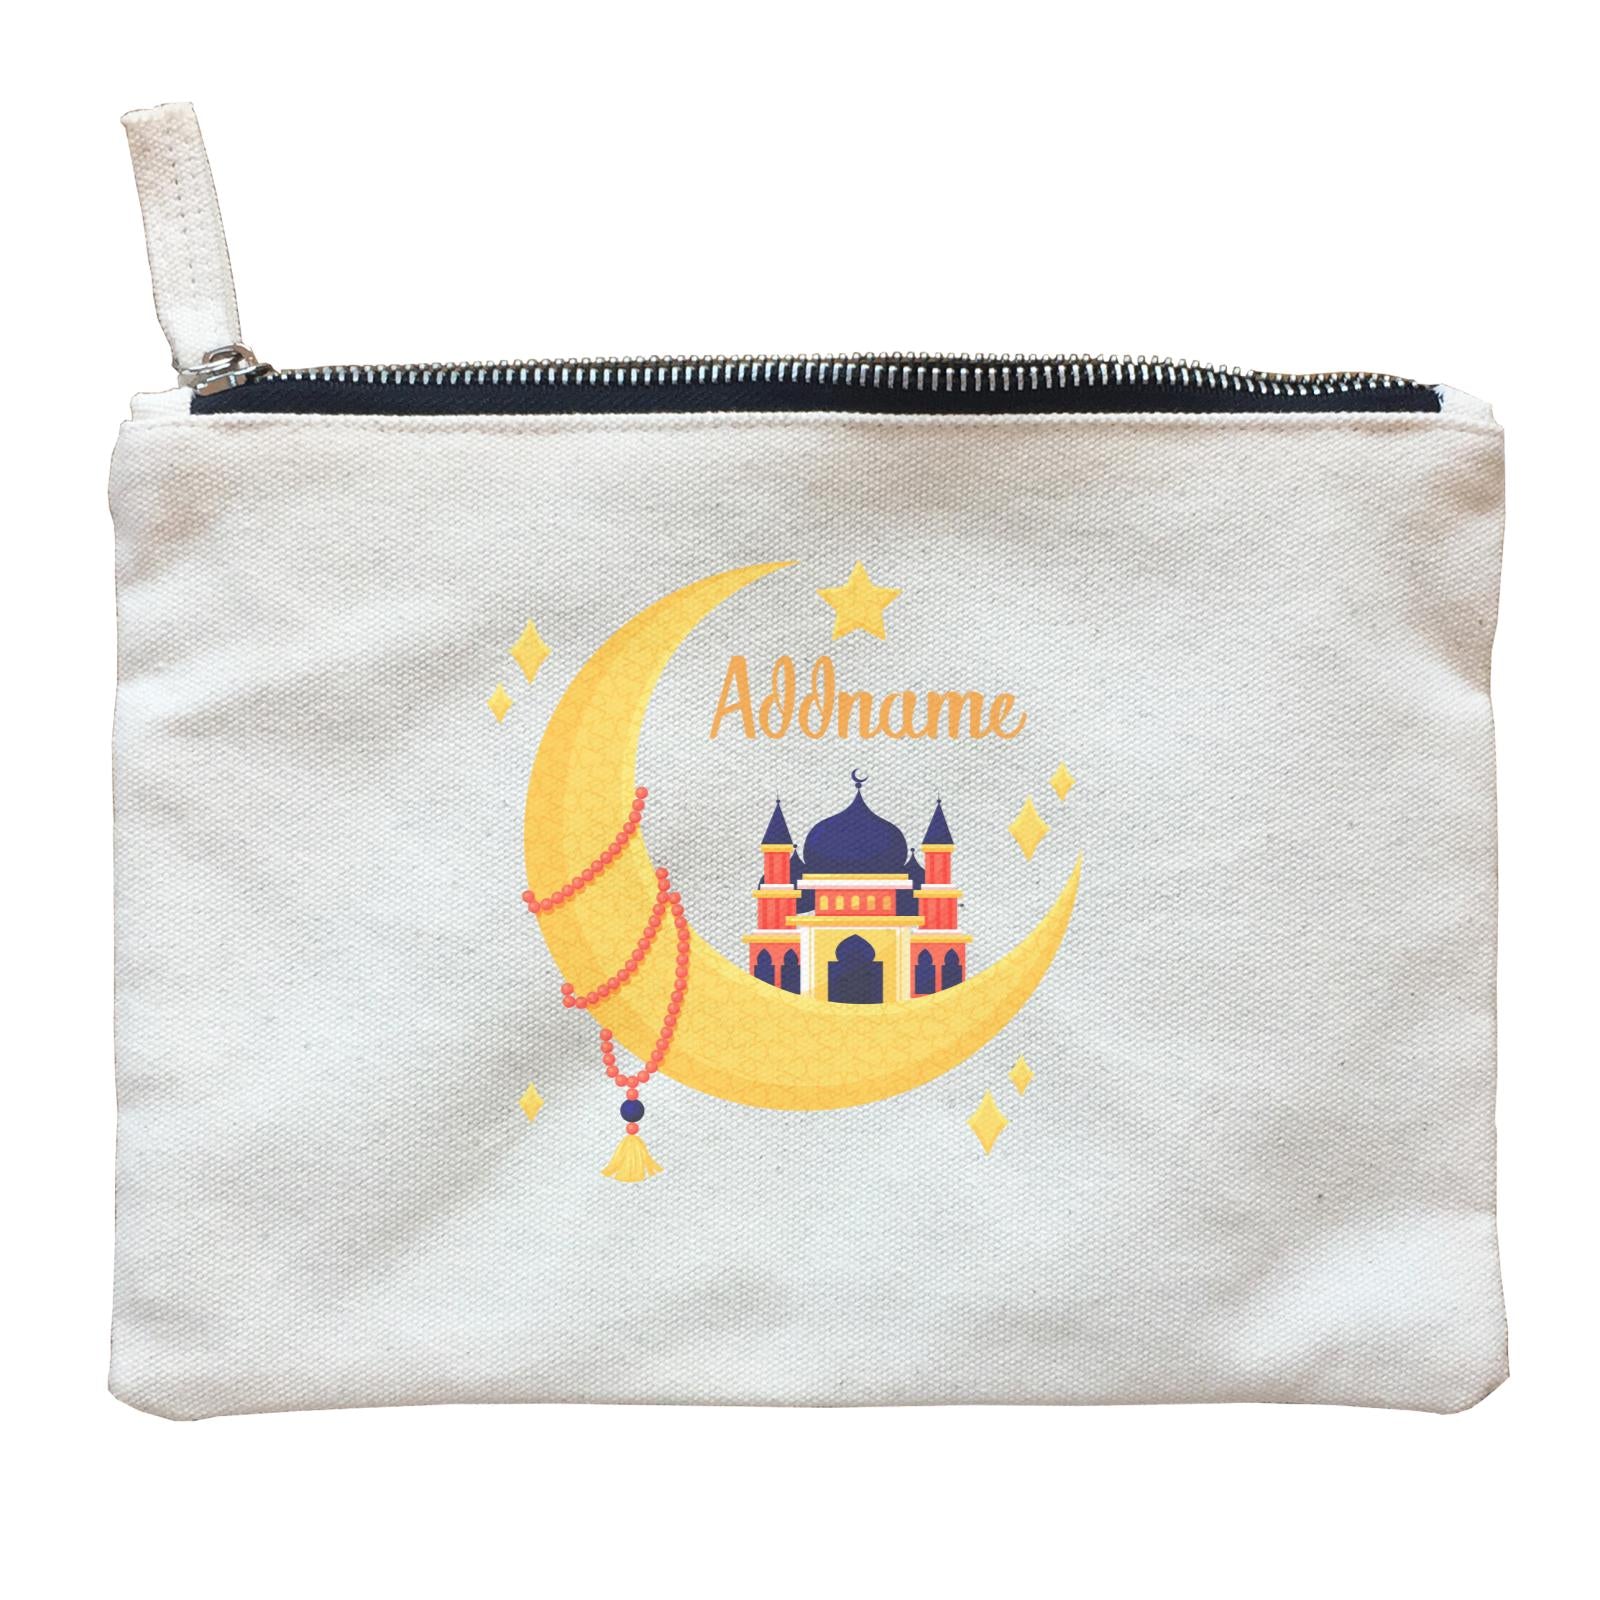 Raya Moon Islamic Moon Star And Mosque Addname Zipper Pouch